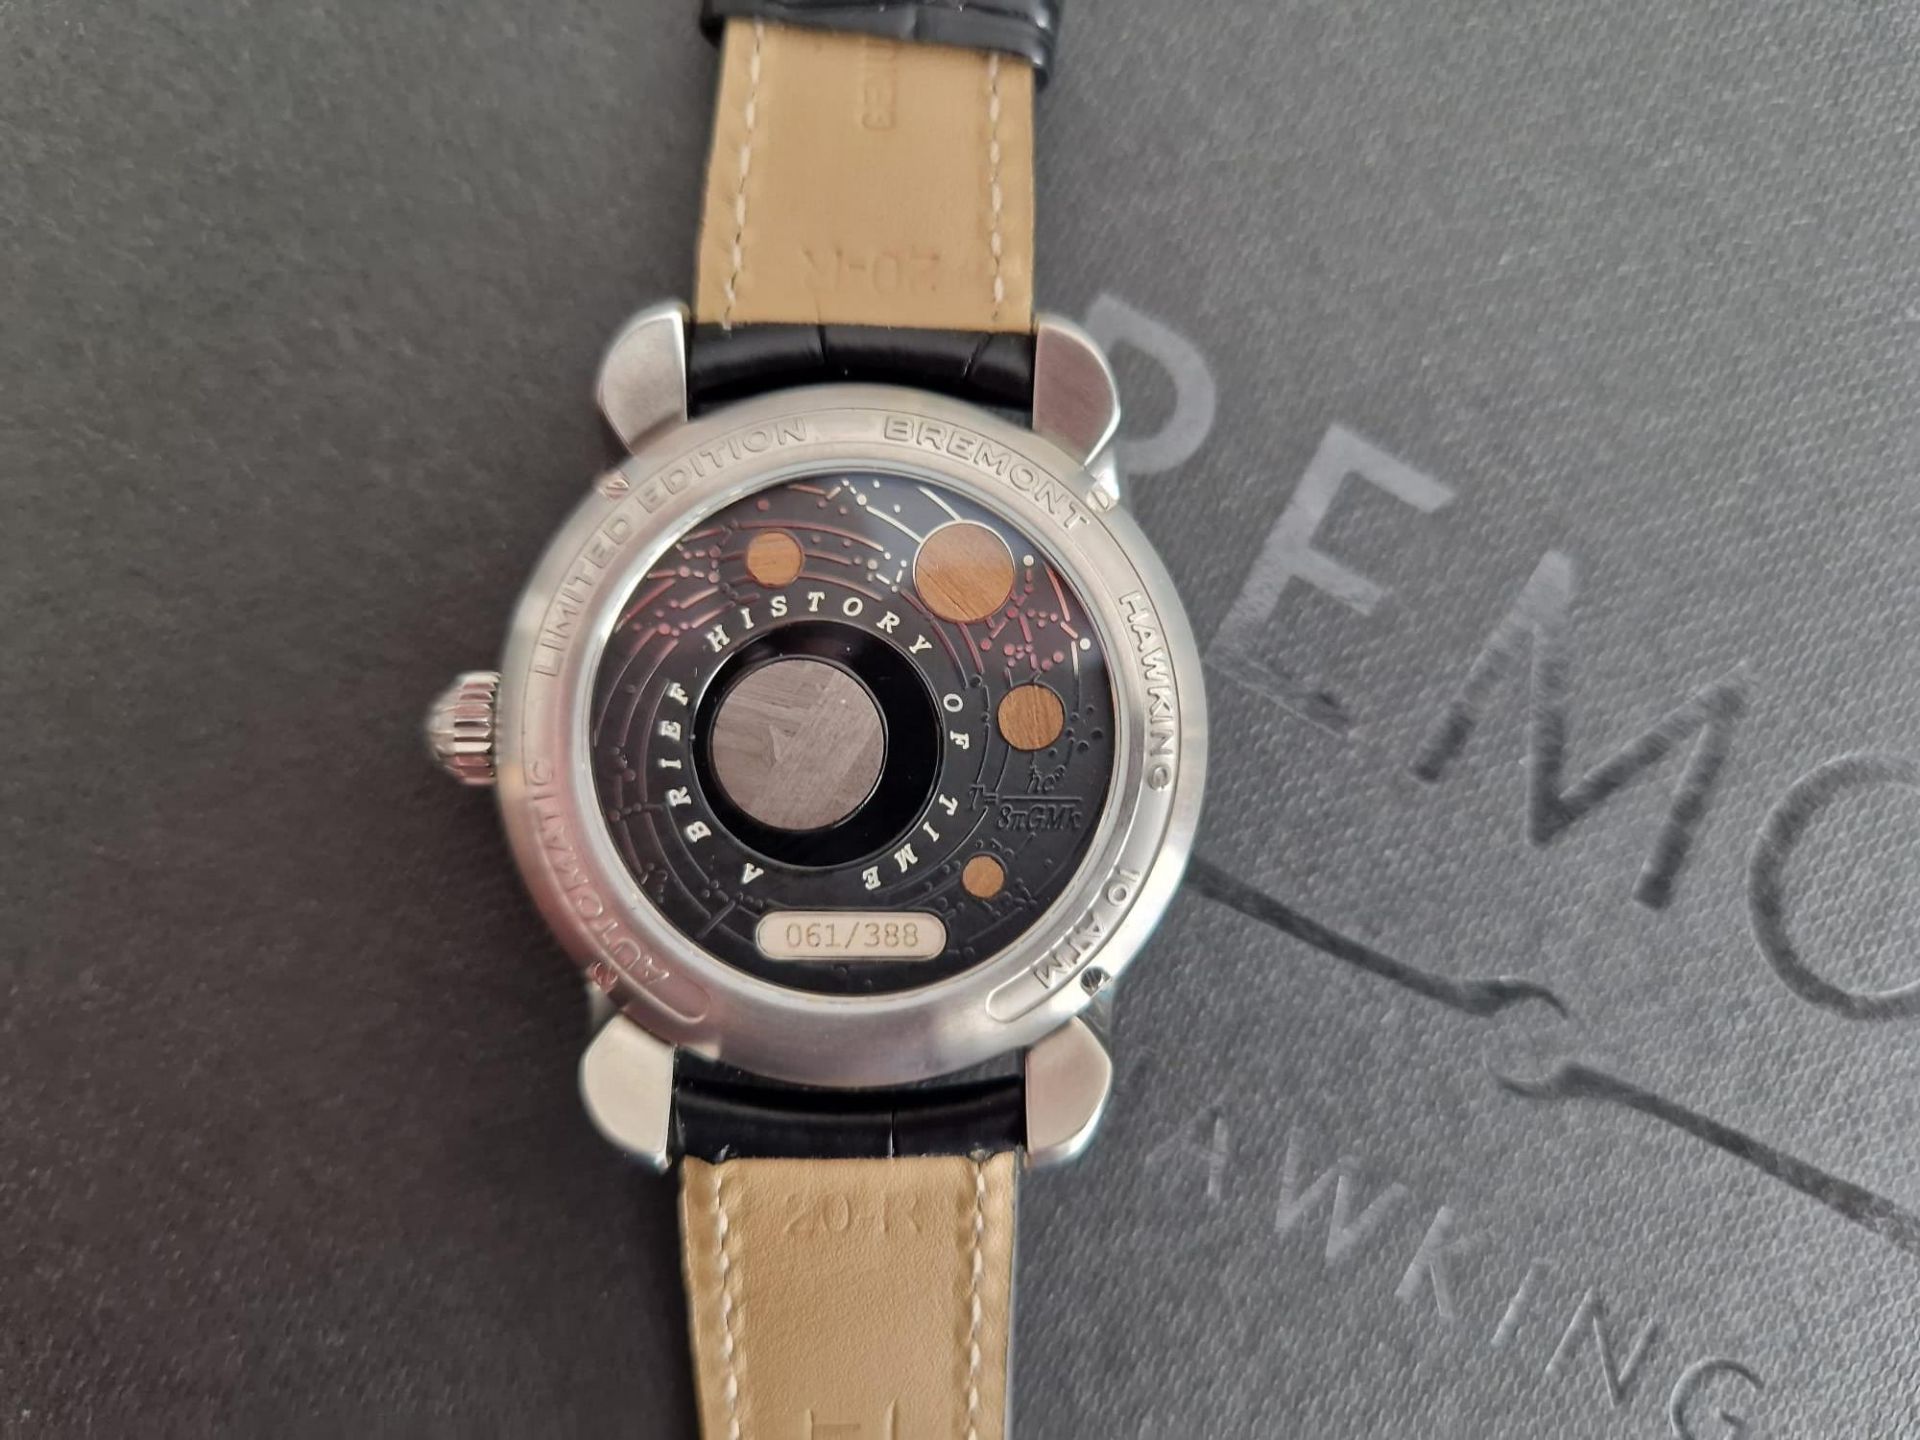 Bremont 'Hawking' Limited Edition 061/388 - Image 2 of 6